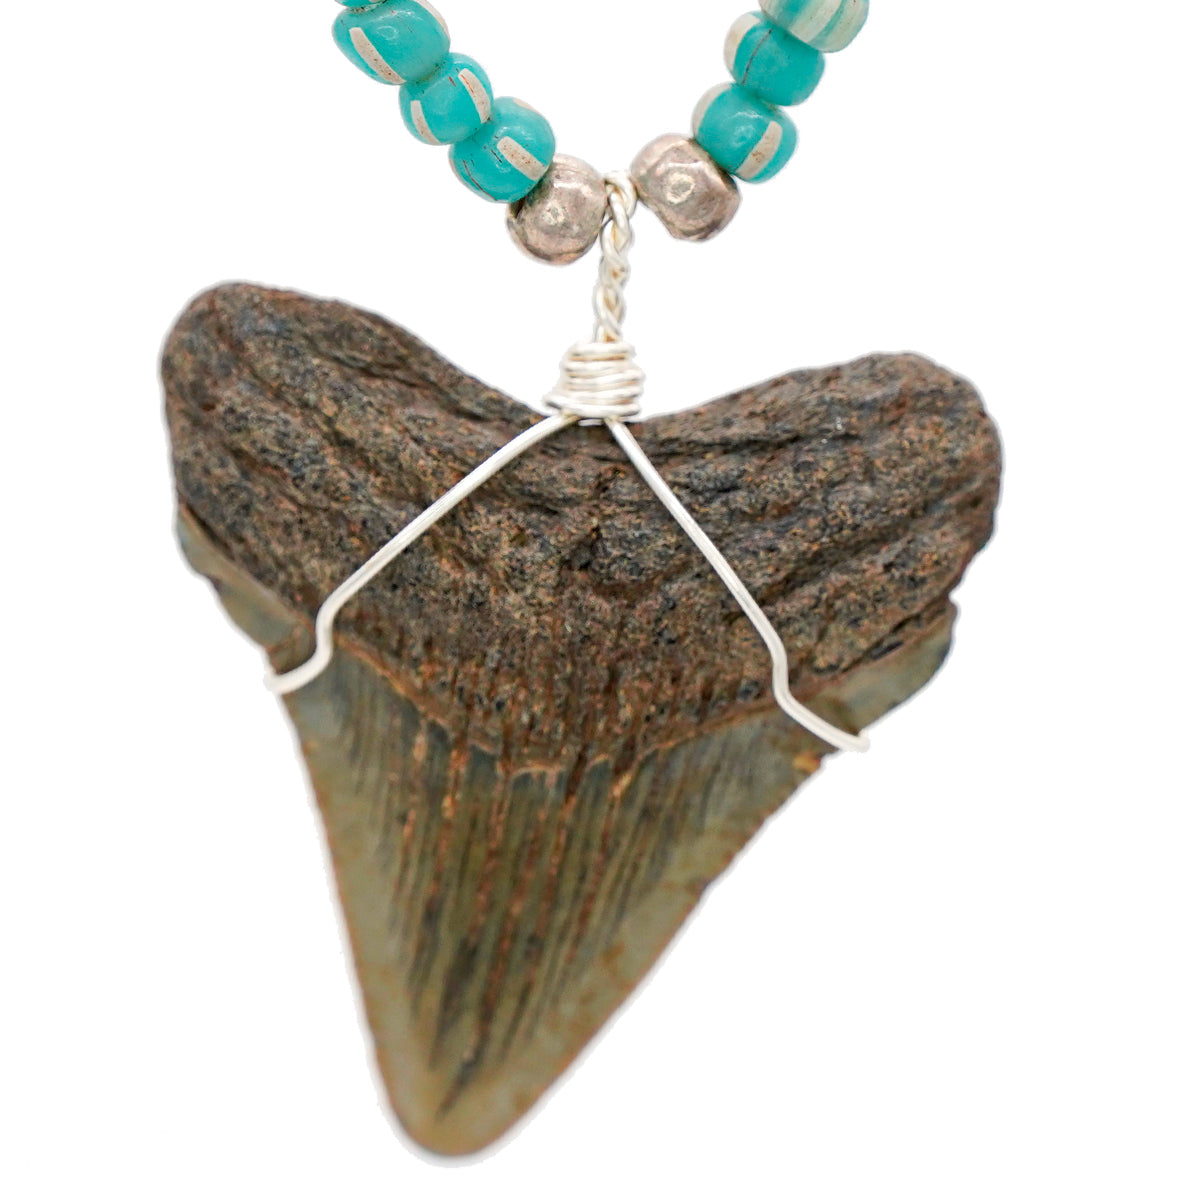 Fossilized Megalodon Tooth on Bone & Indonesian Glass Bead Necklace